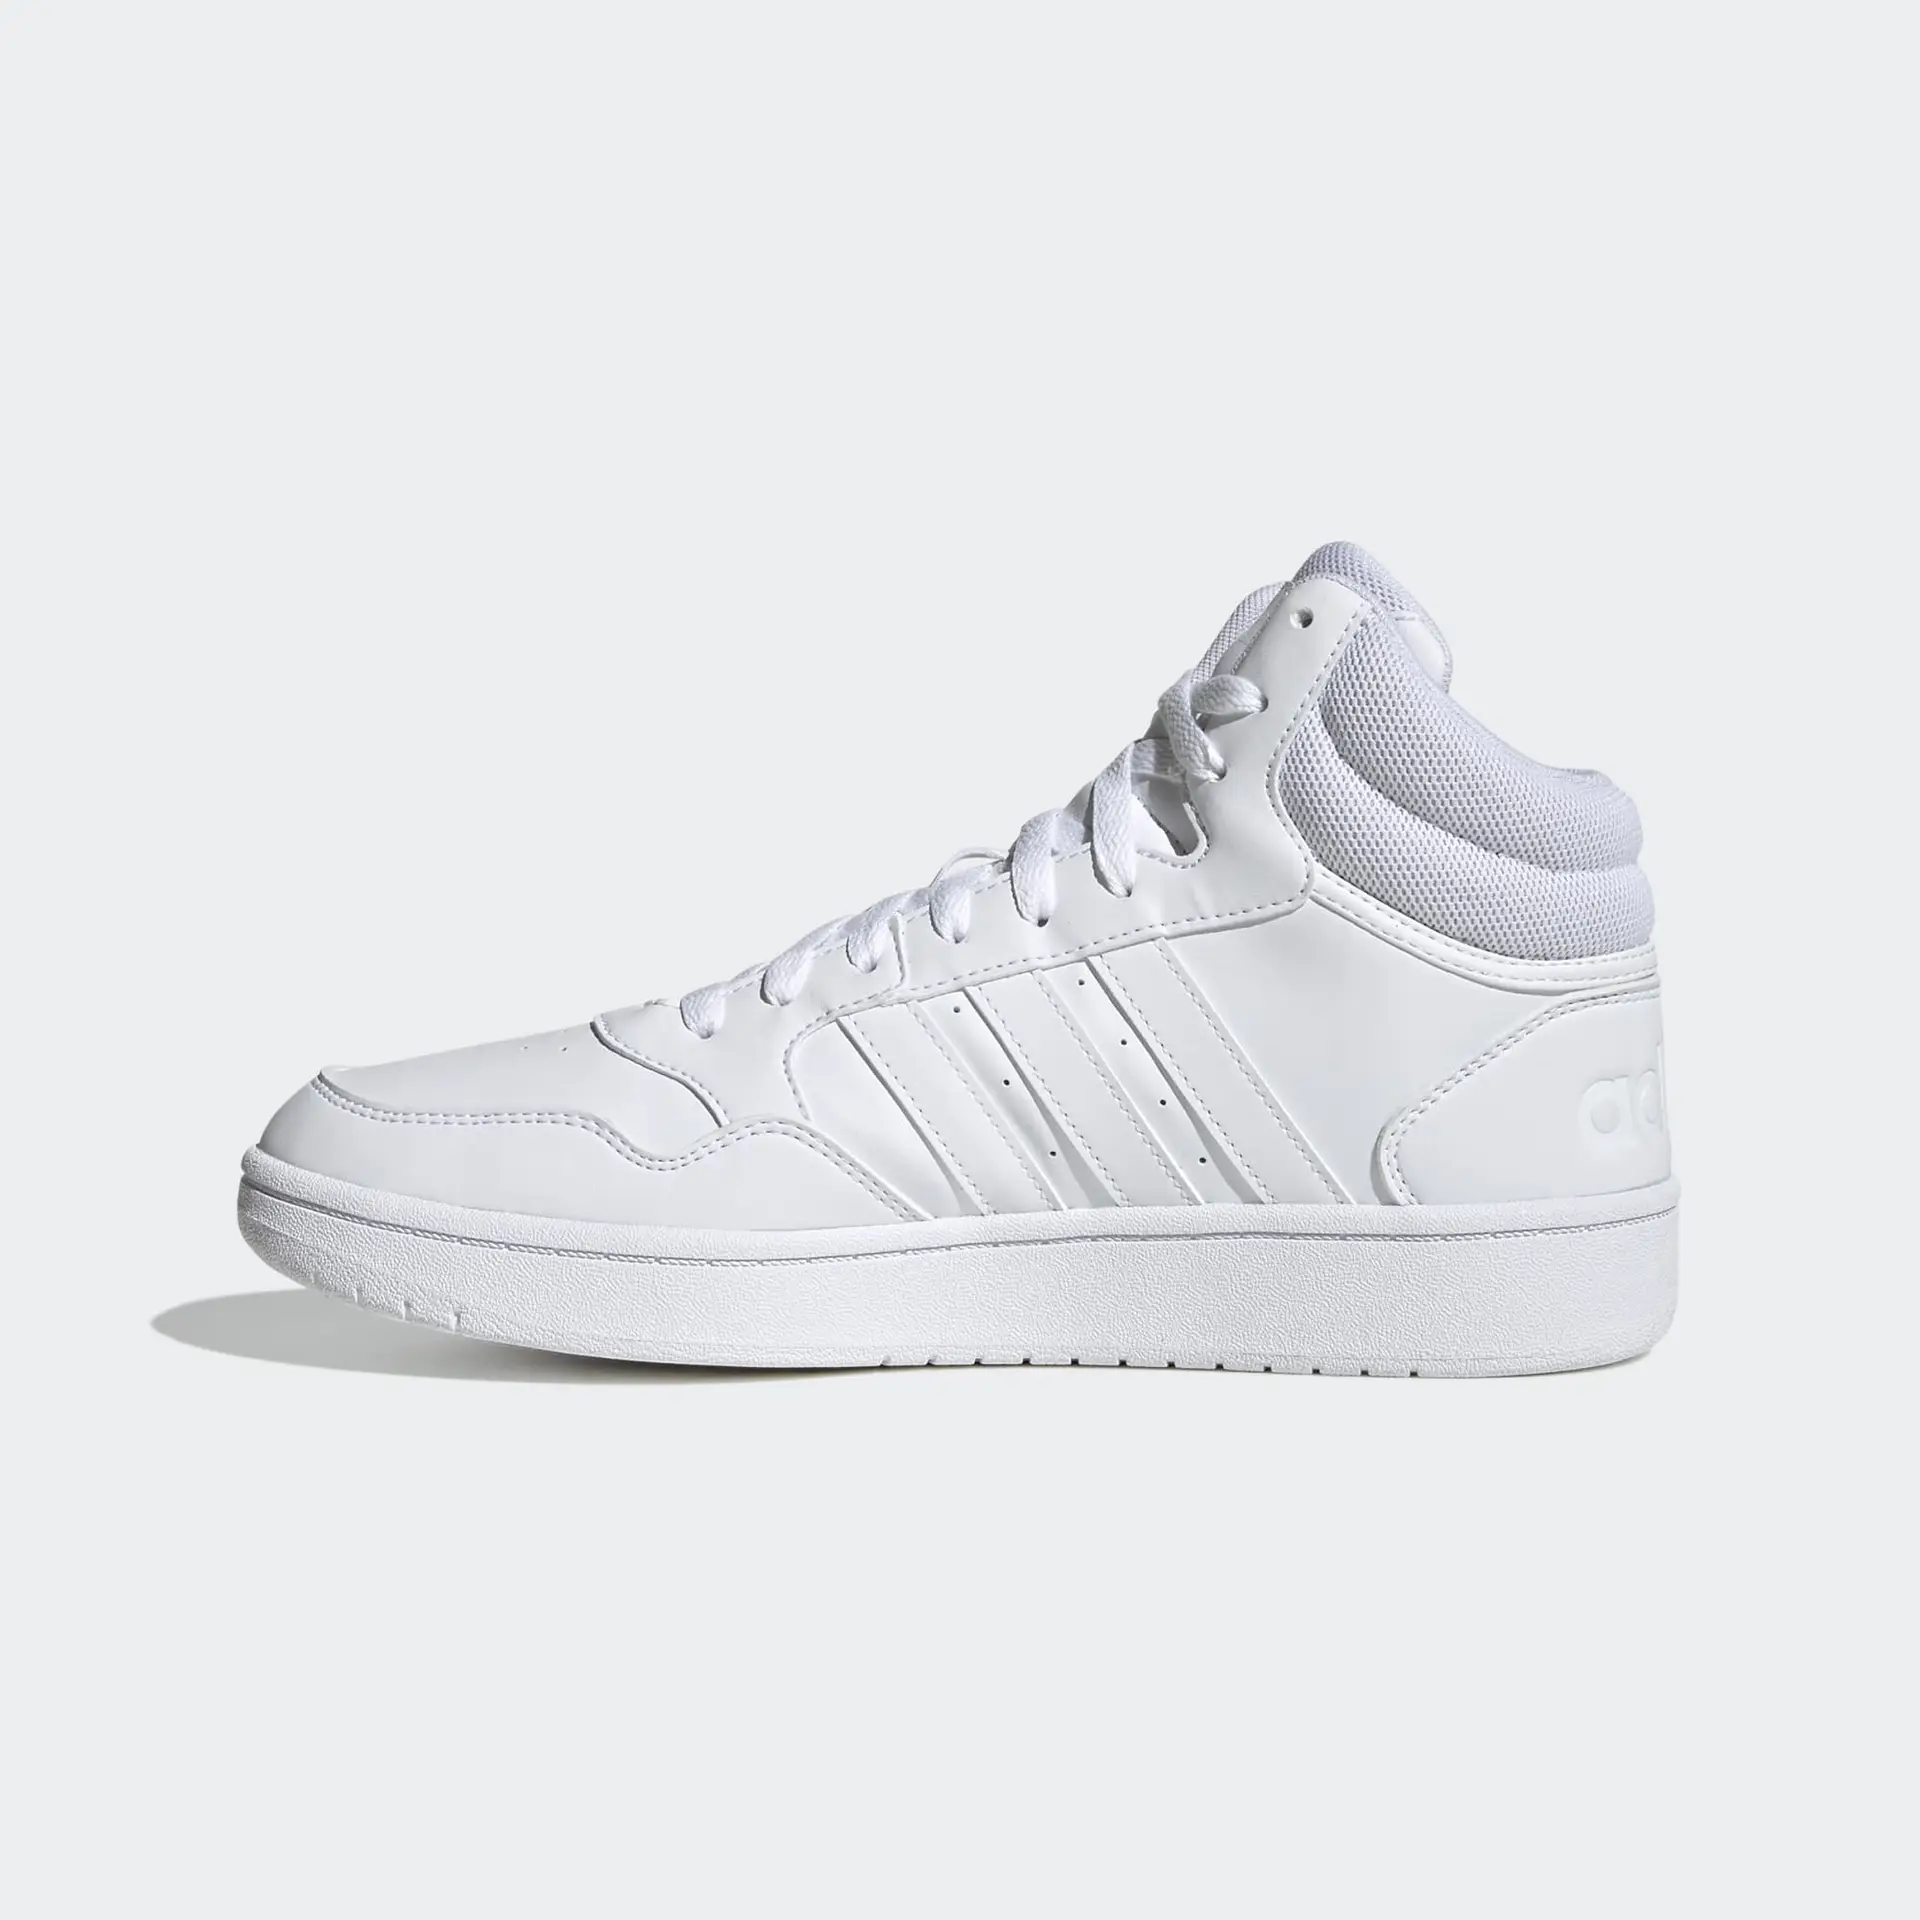 adidas Hoops 3.0 Mid Sneakers White/White